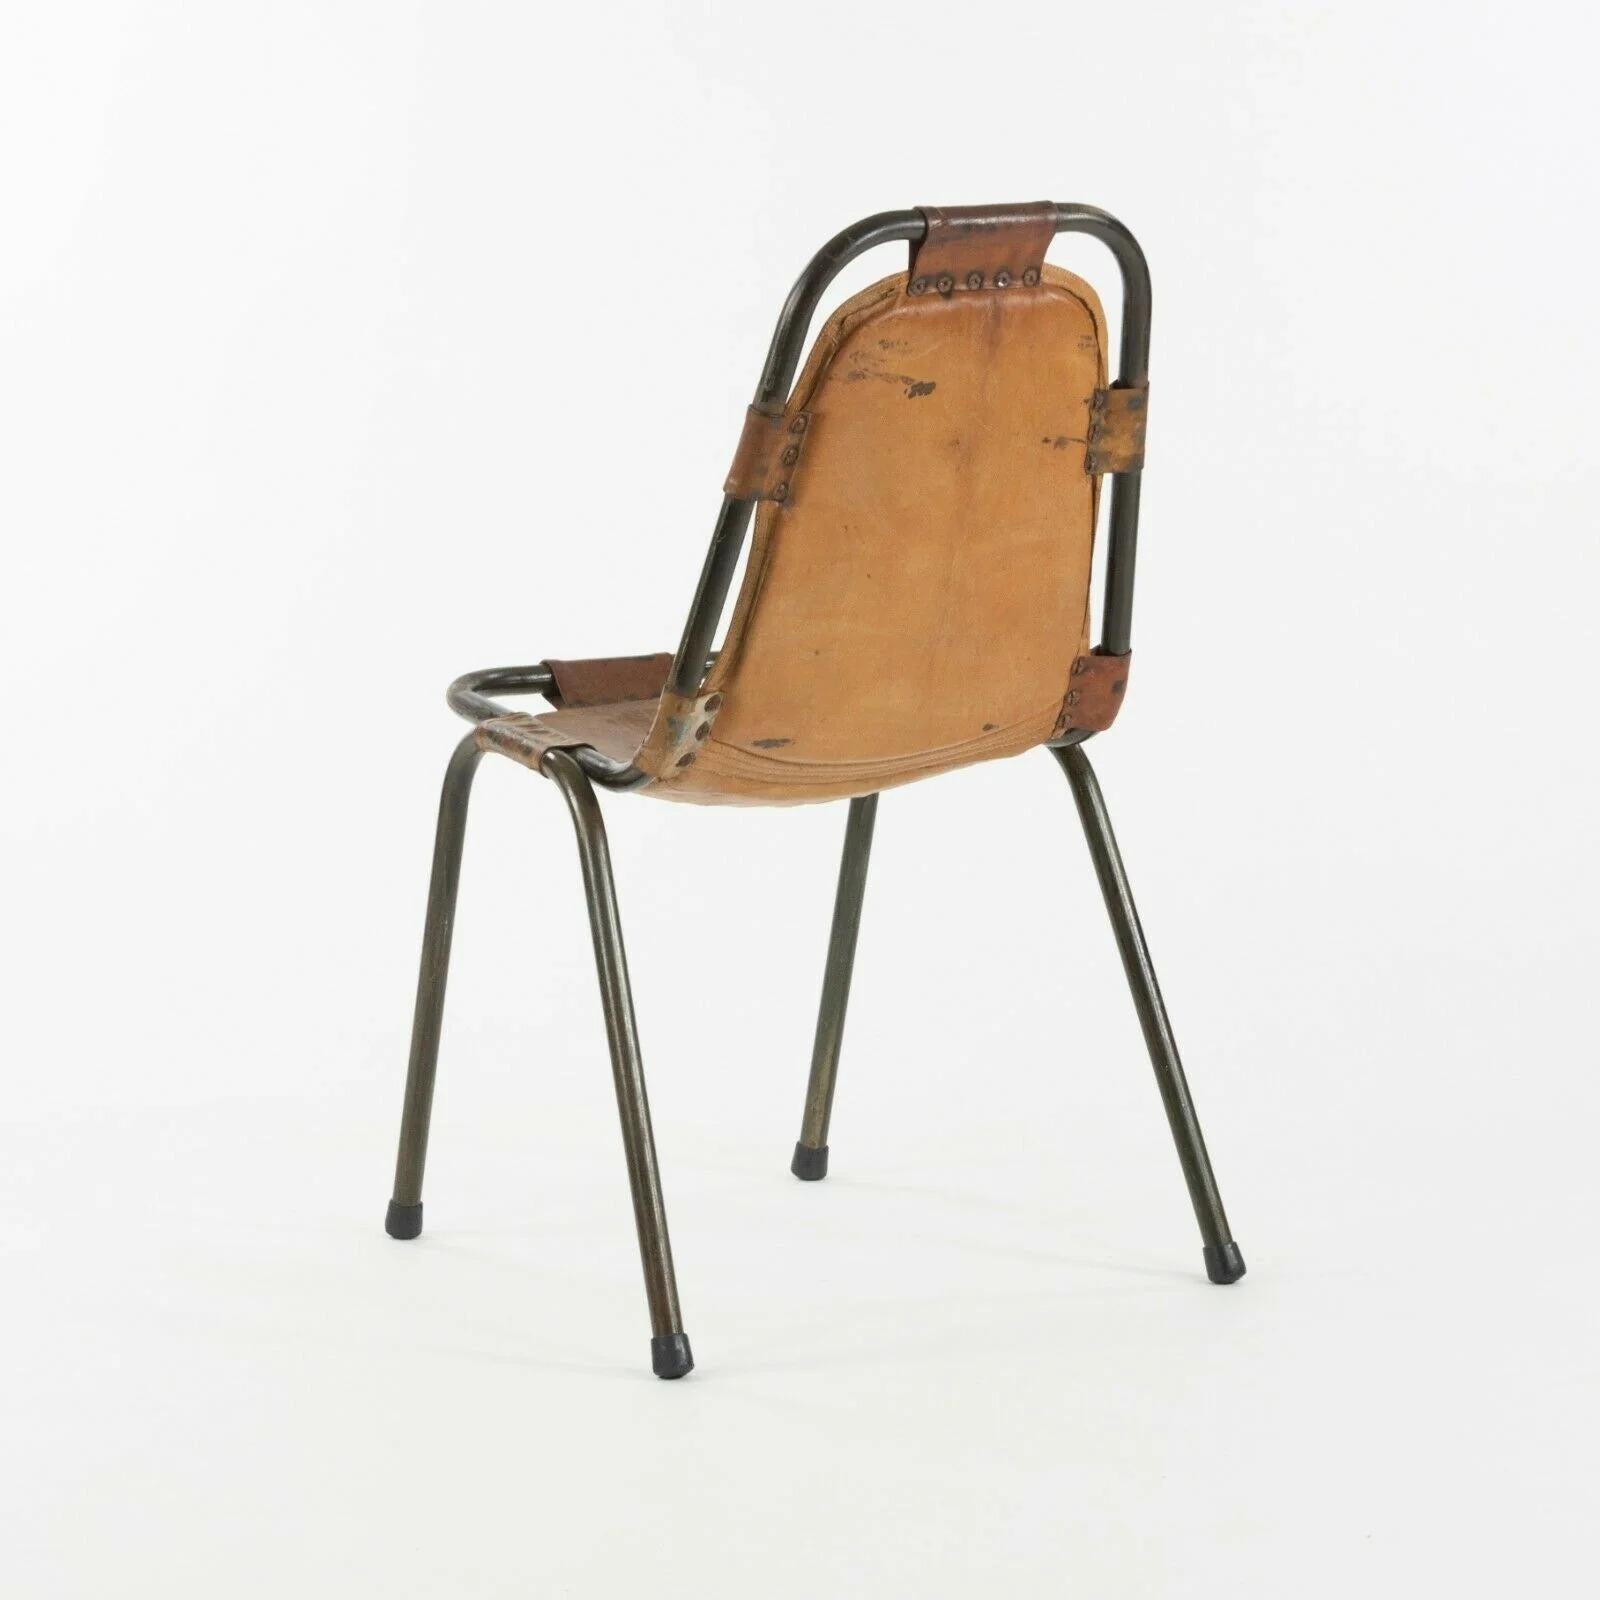 Metal 1960s Dal Vera Stacking Chairs for Charlotte Perriand Les Arcs Resort Set of 6 For Sale